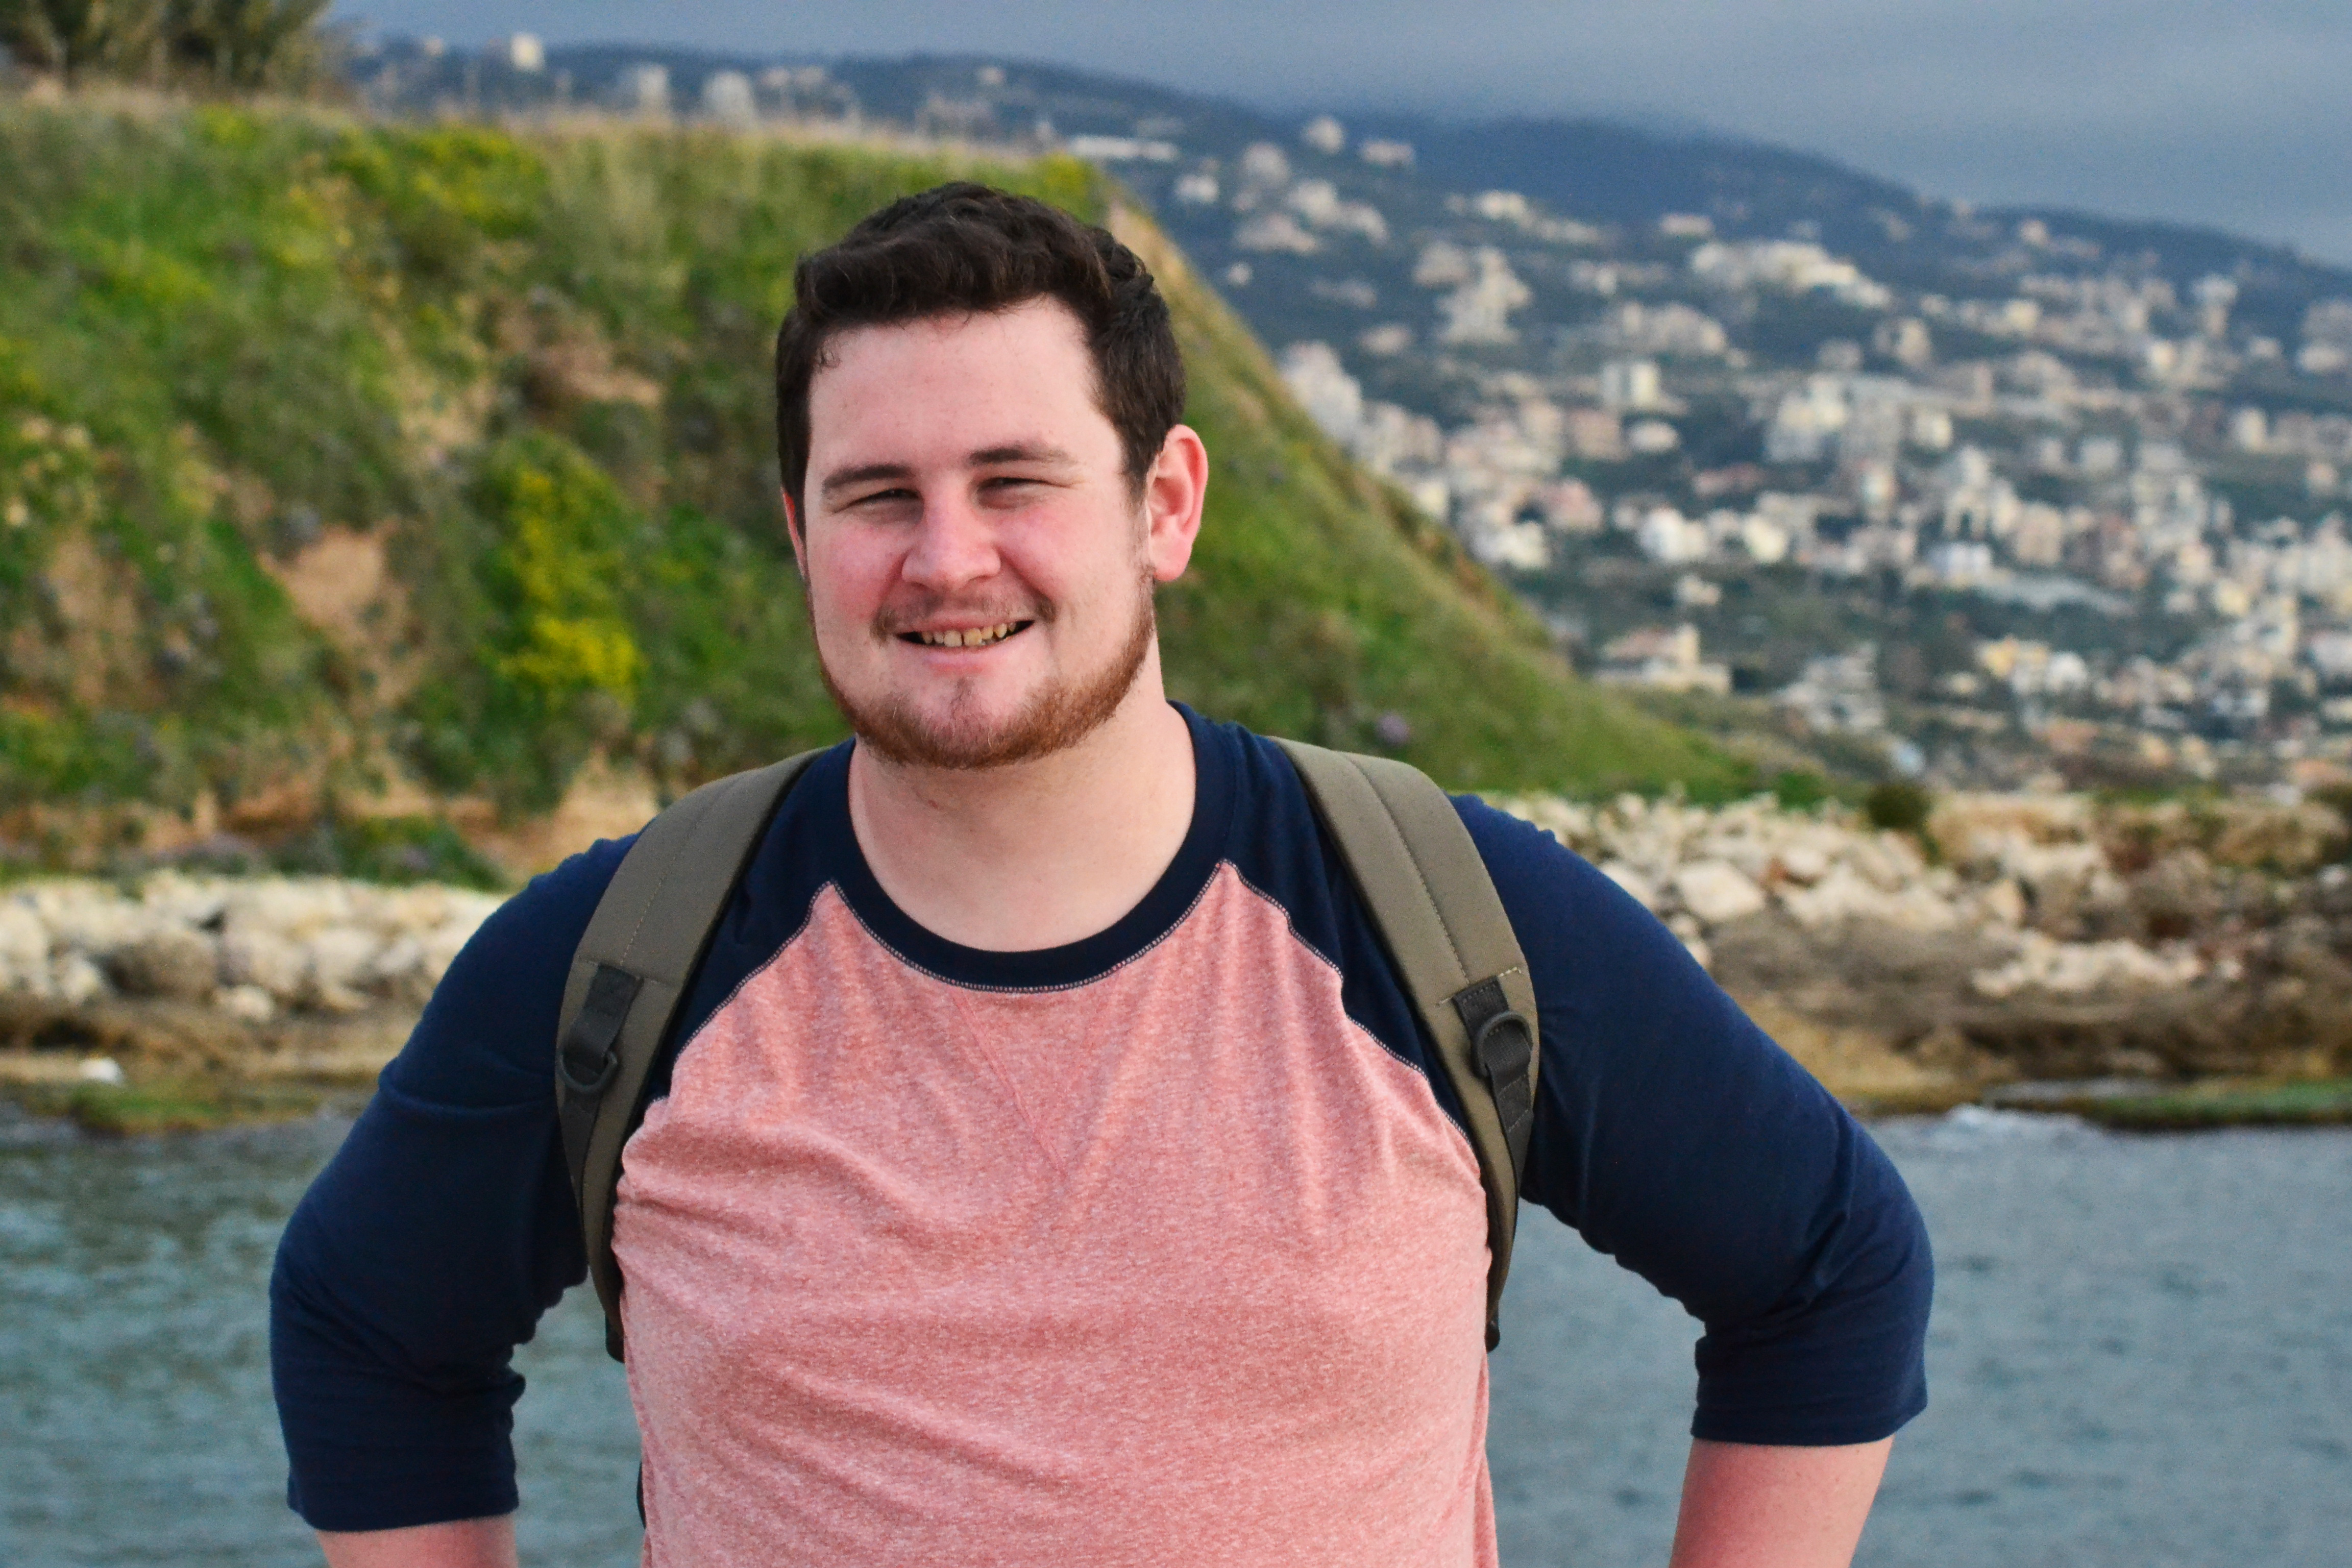 Connor posing in front of a seaside town in Europe